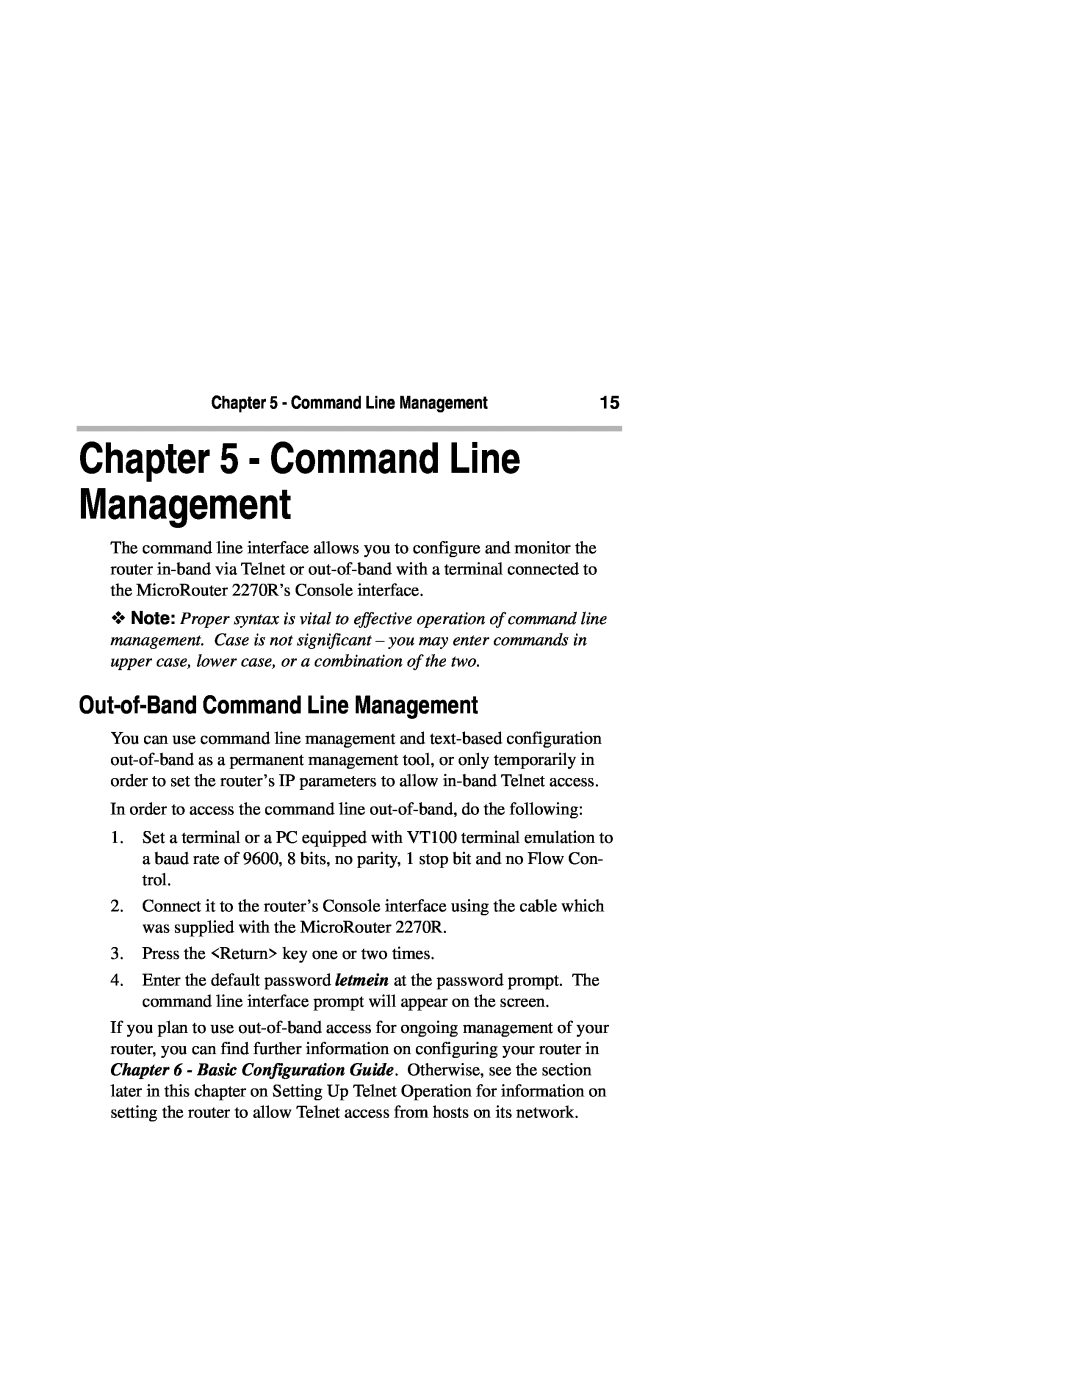 Compatible Systems 2270R manual Out-of-Band Command Line Management 